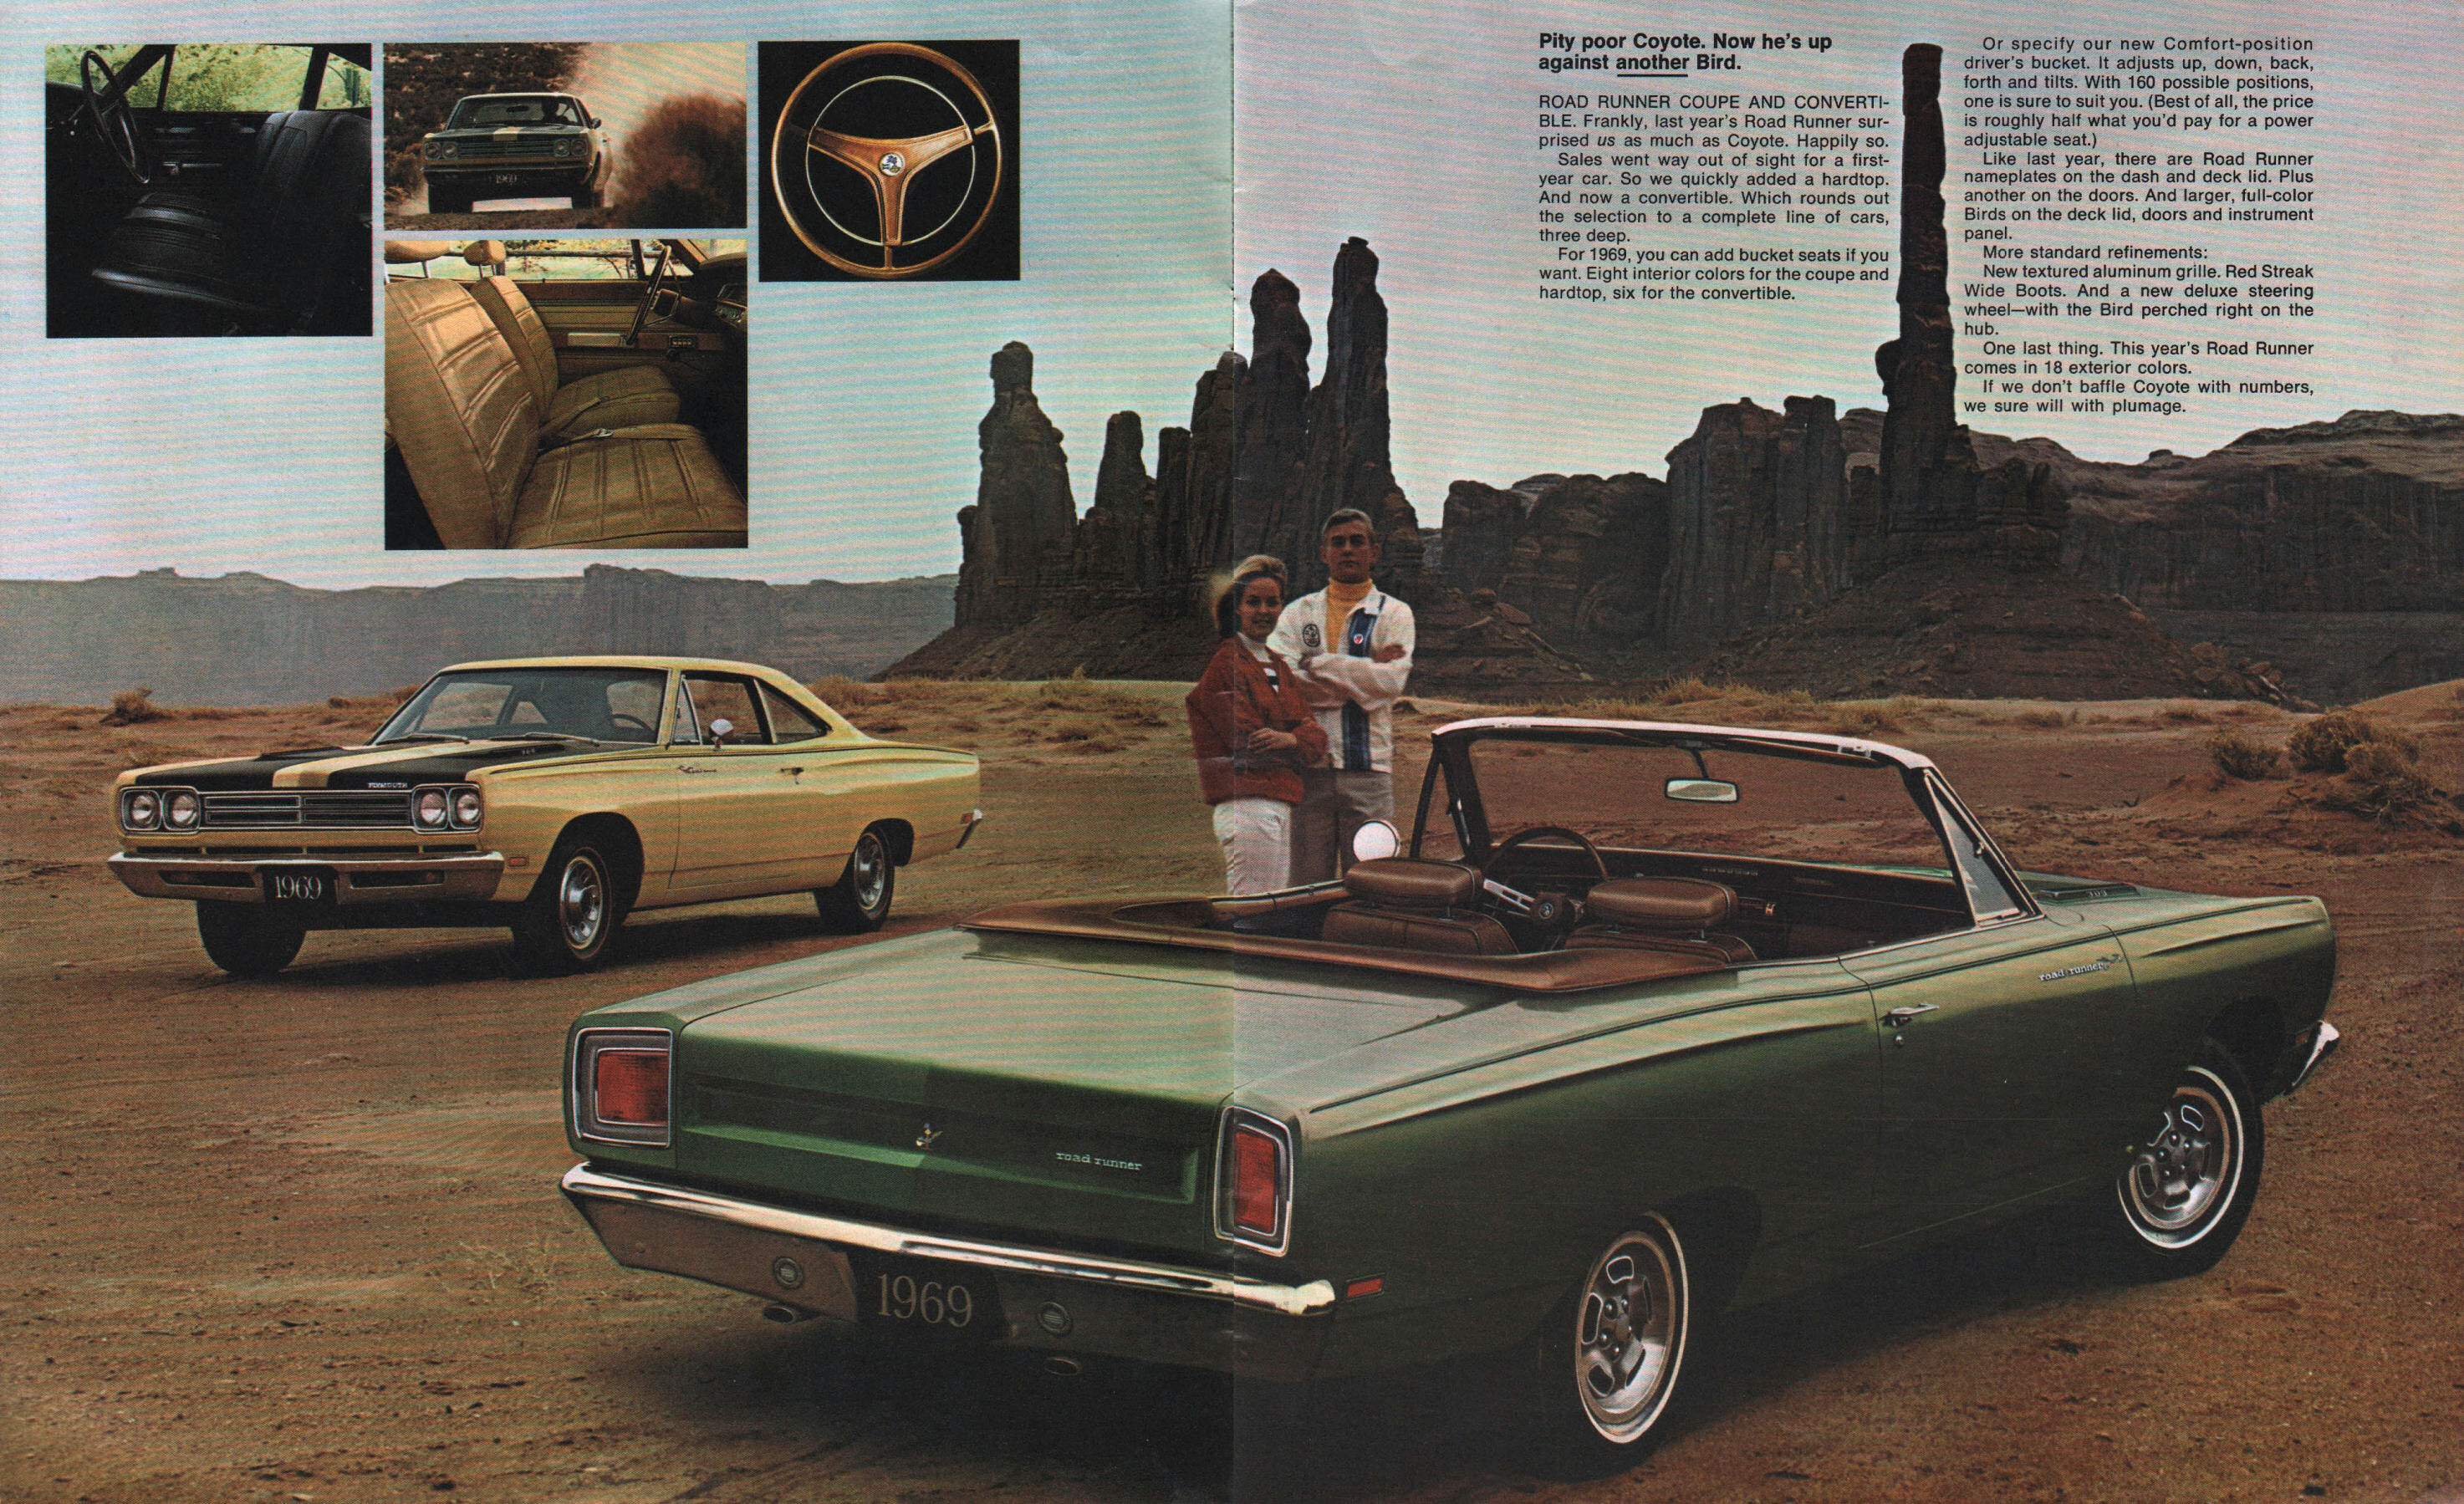 1969_Plymouth_Belvedere-08-09